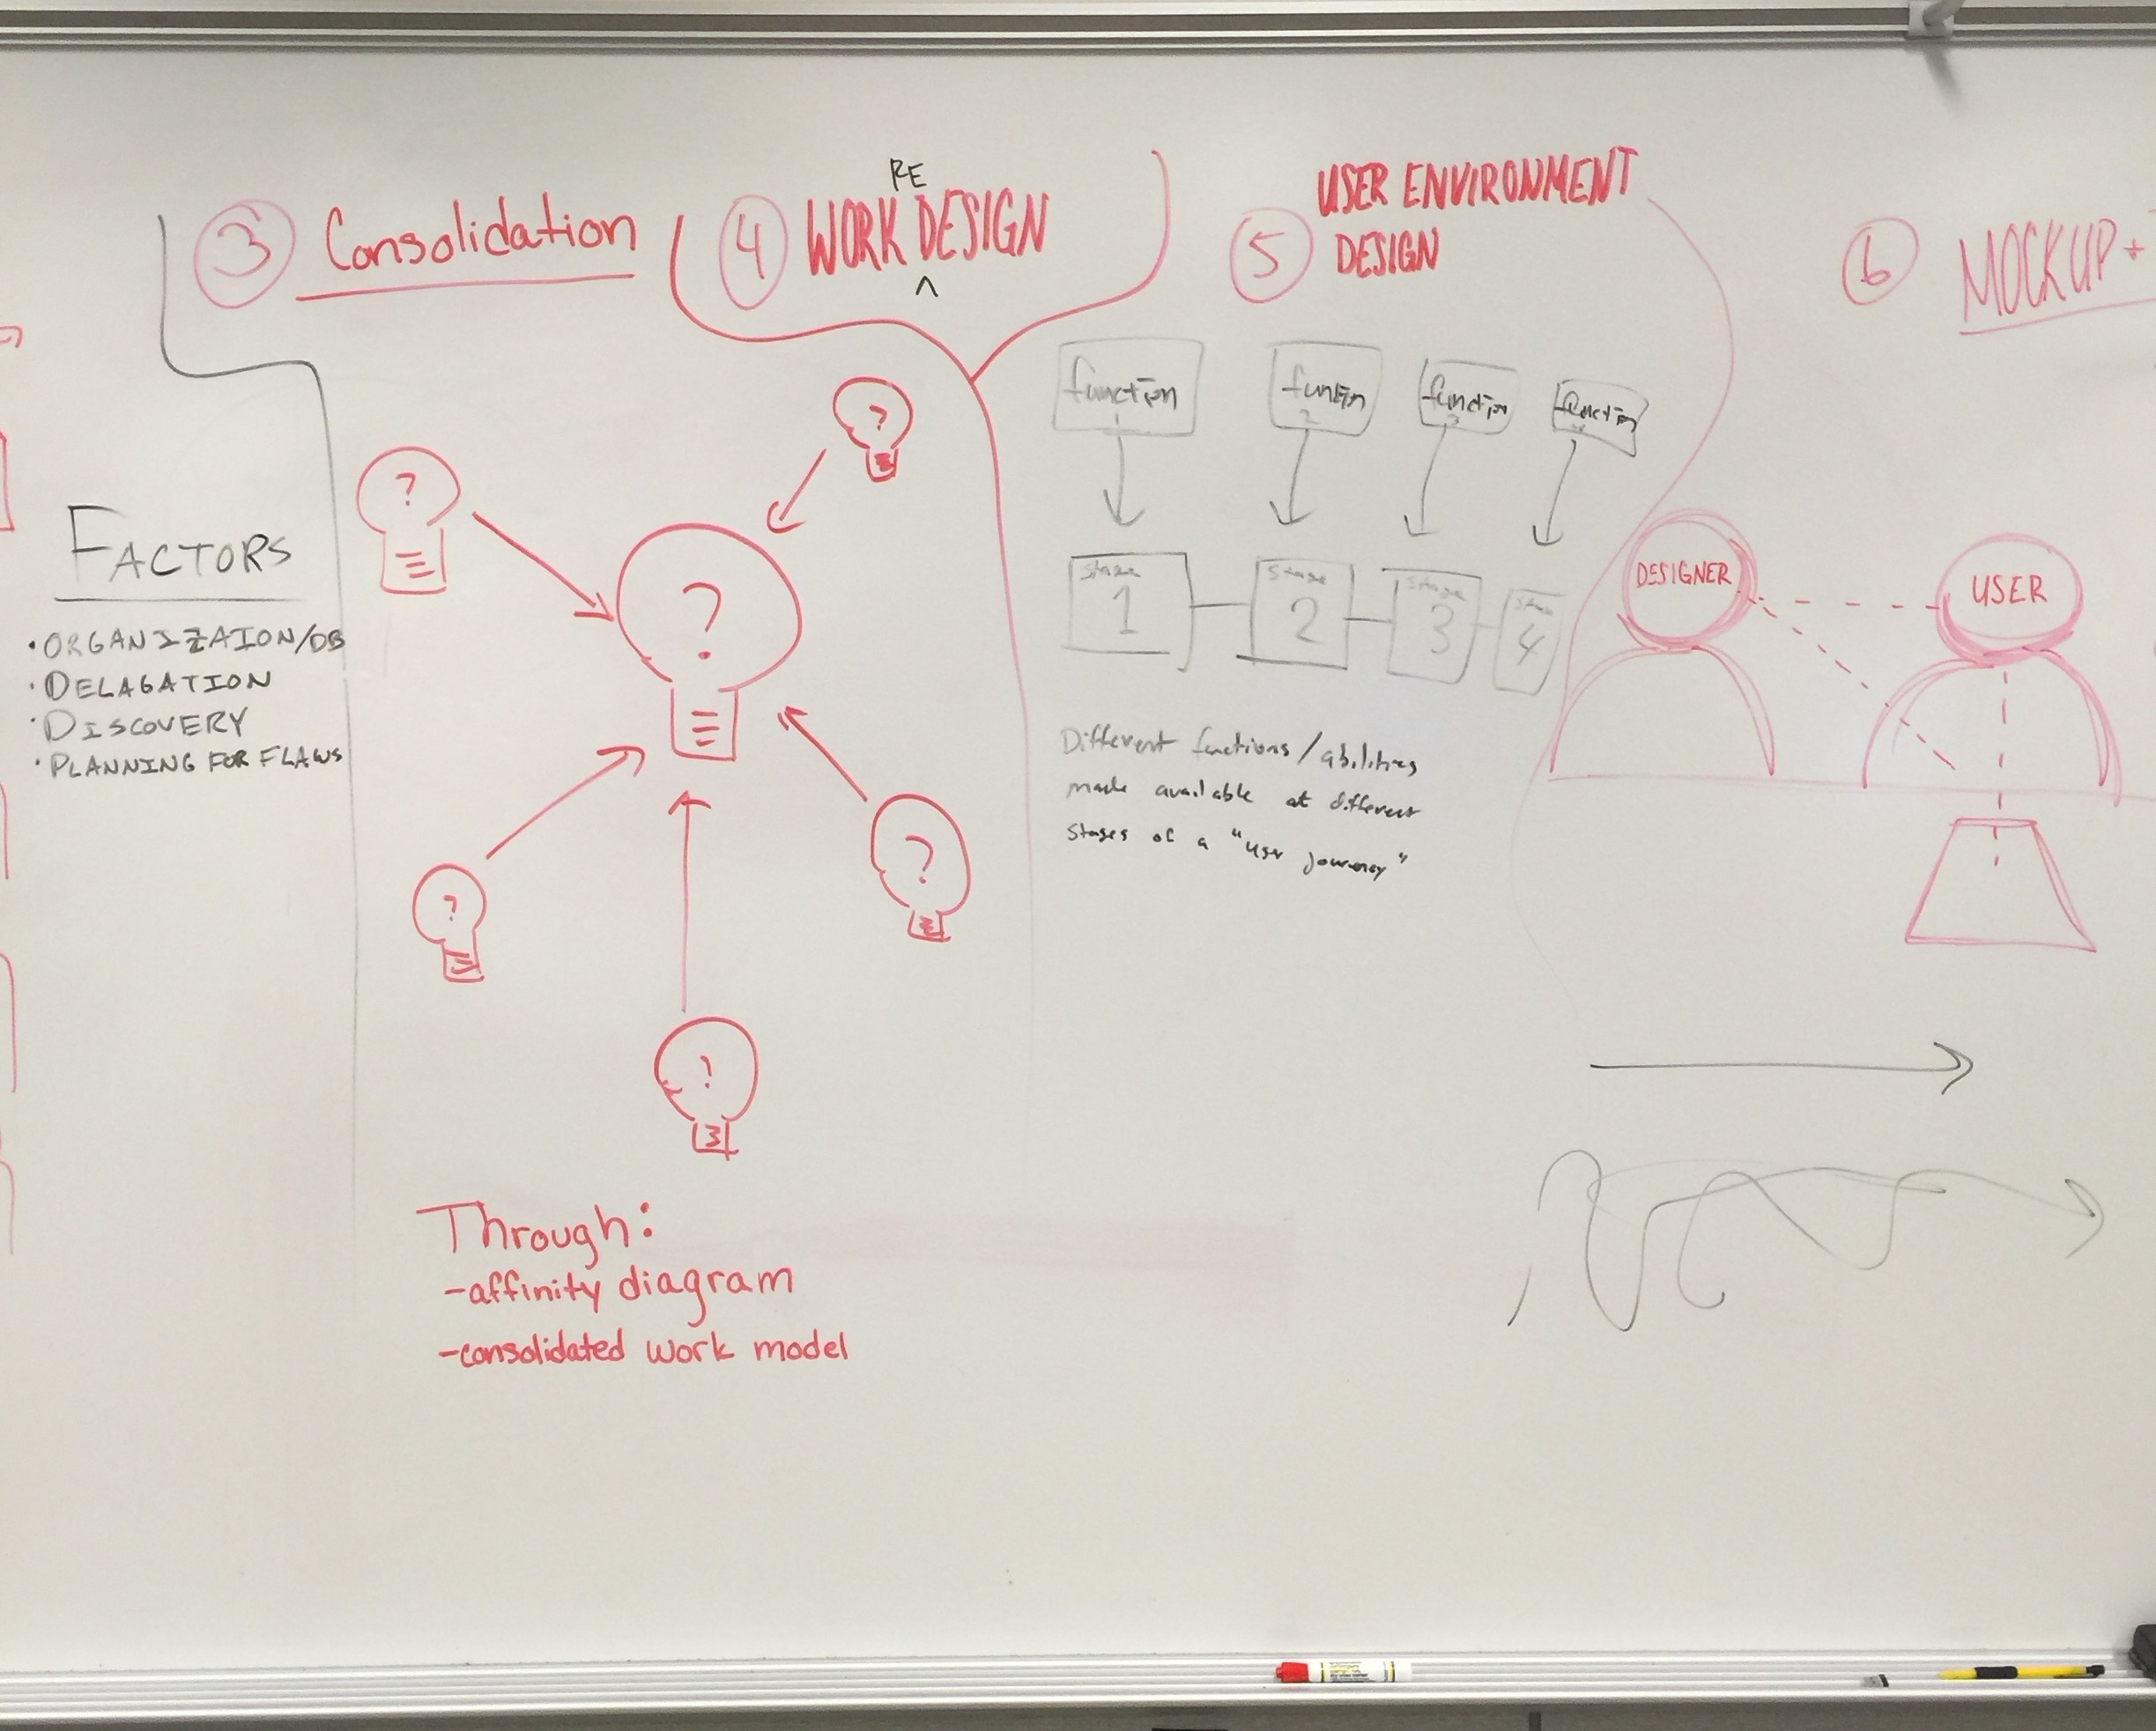 Visual brainstorming process on a whiteboard